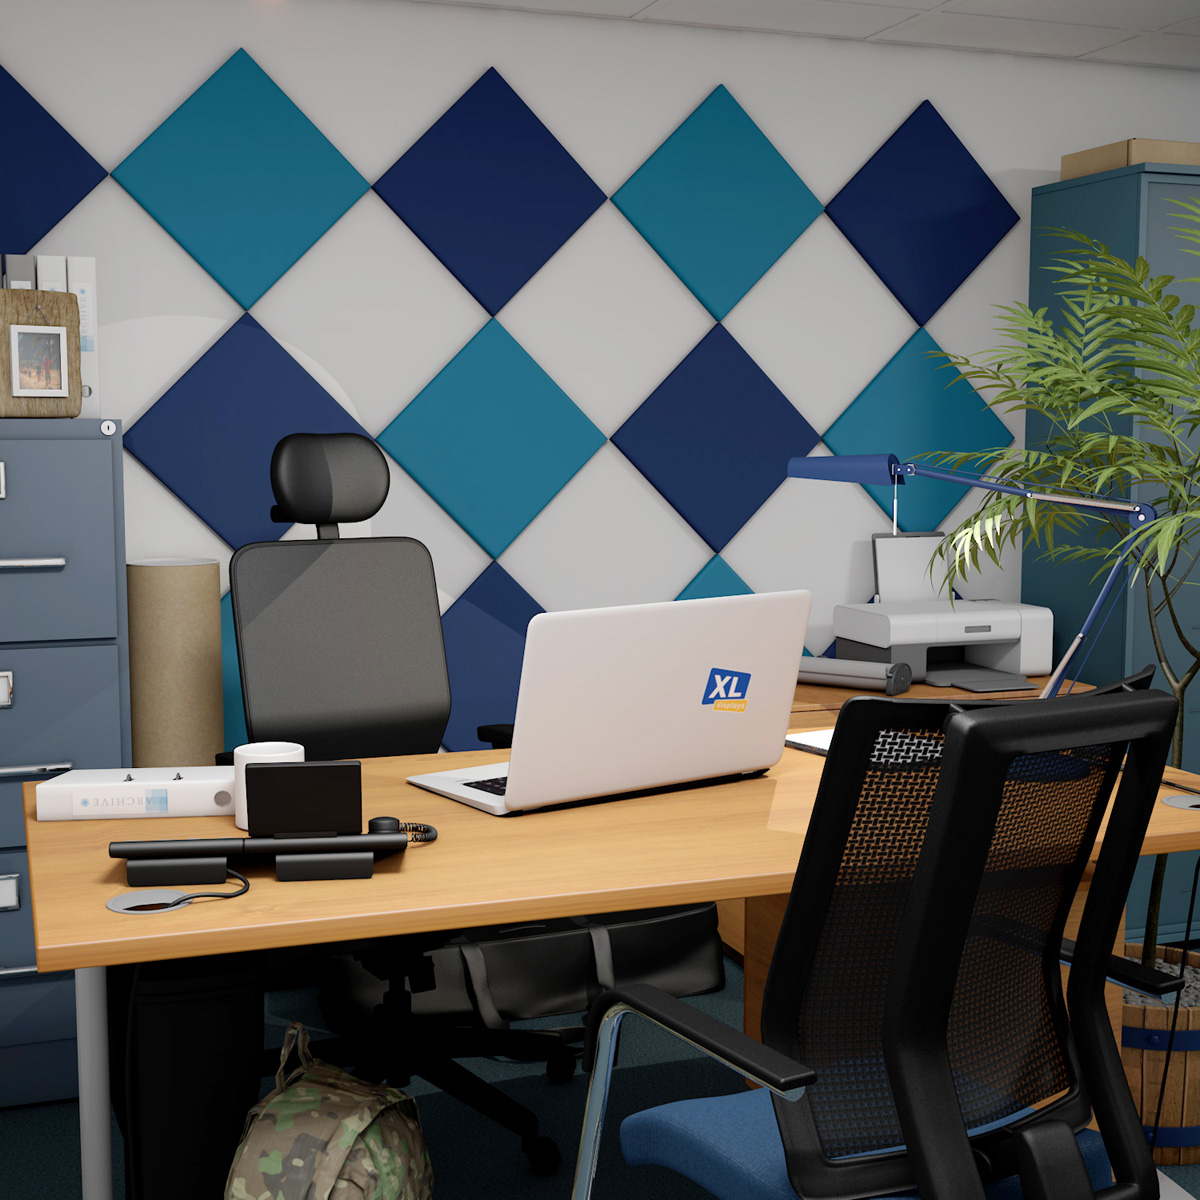 QUADRUM™ Square Acoustic Panels For Office Walls Of Home Studies